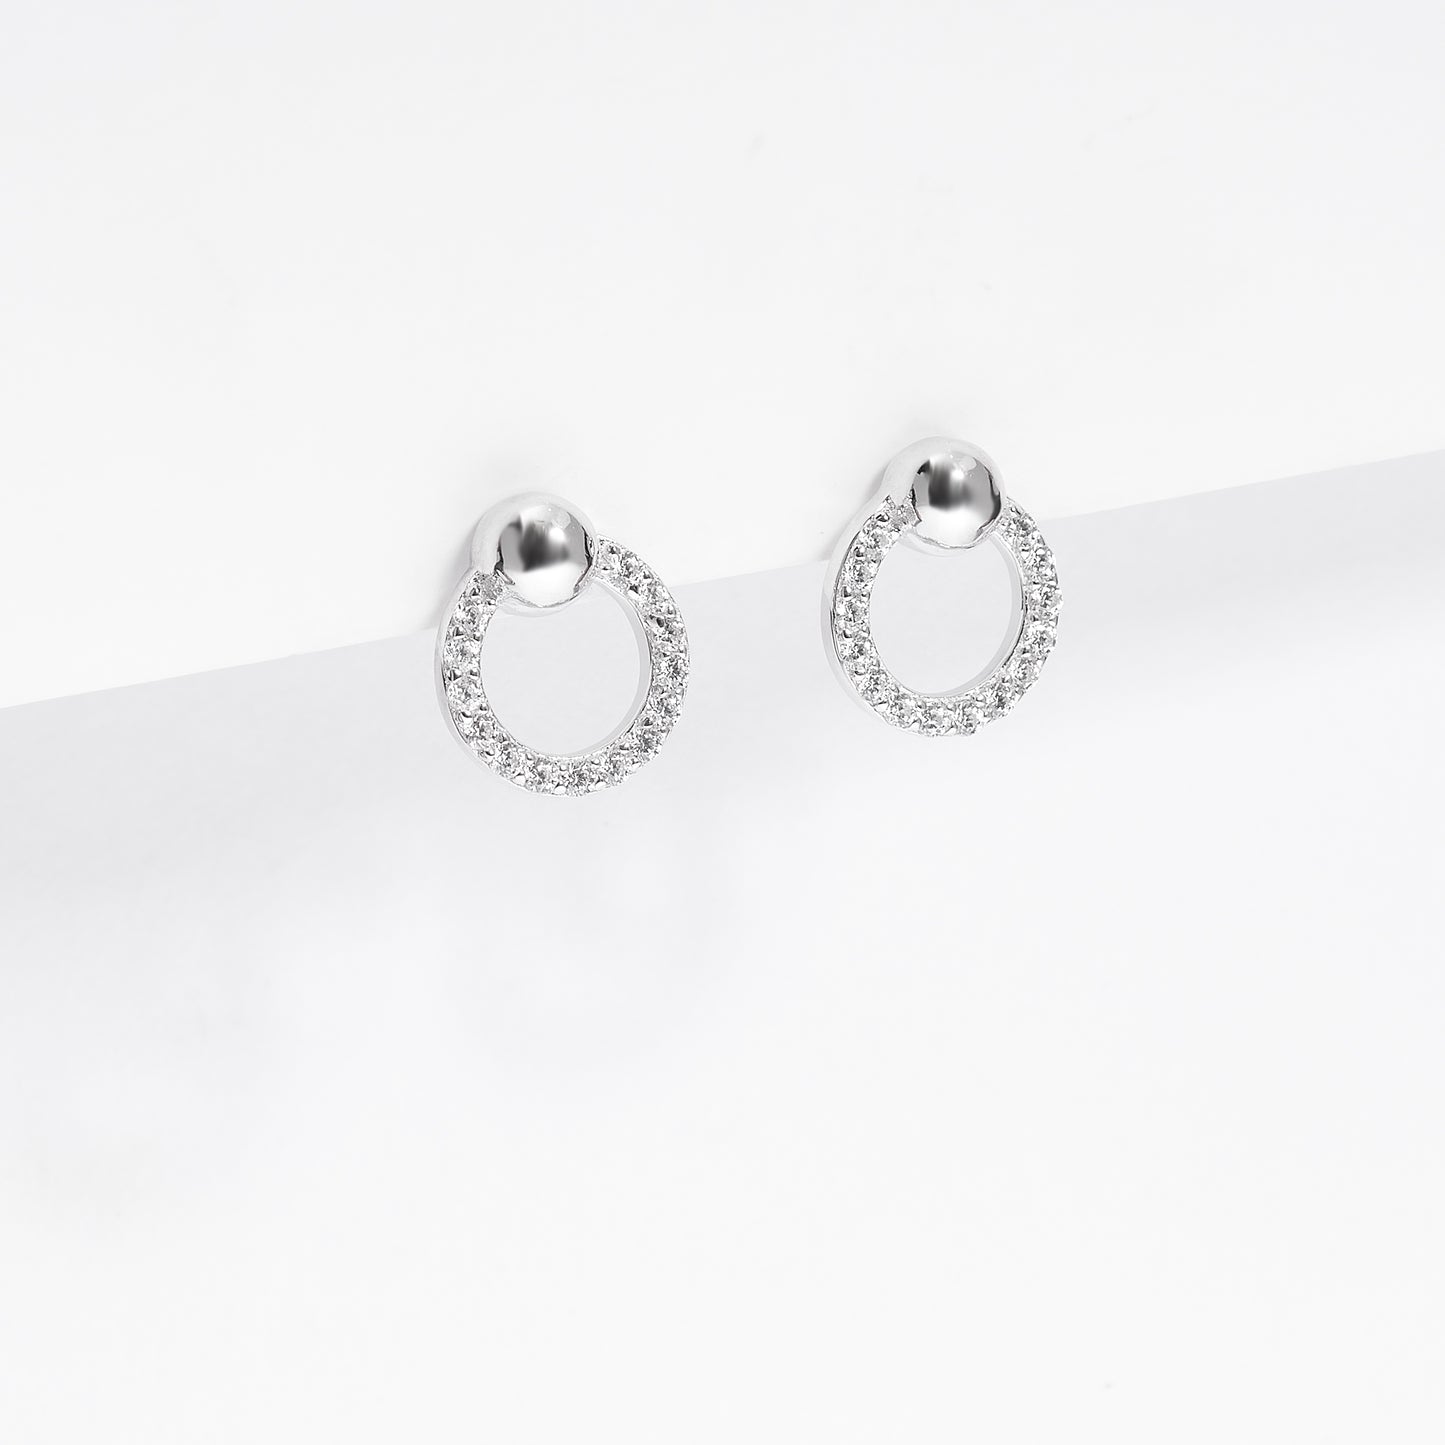 Sterling Silver Zirconia Open Circle Stud Earrings With Plain Ball